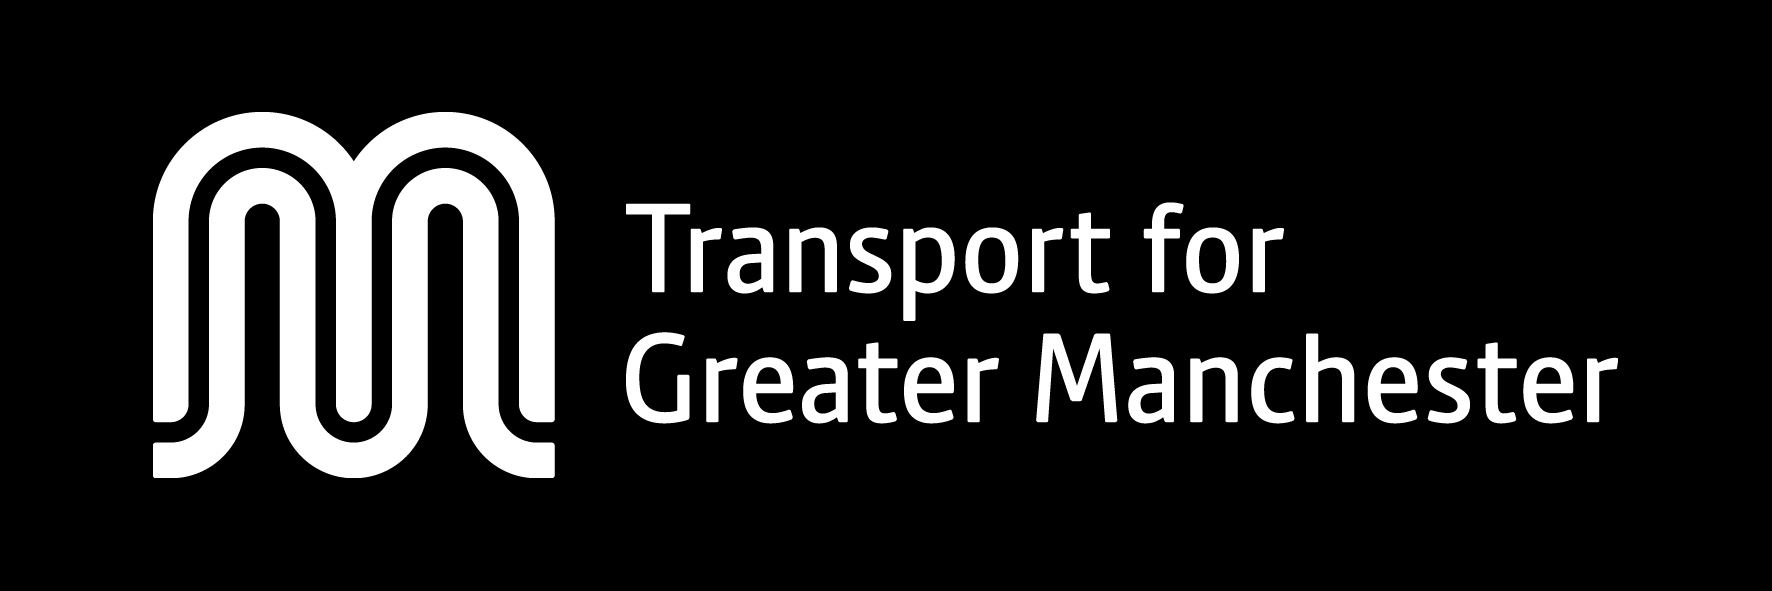 Head of Procurement, Transport for the North